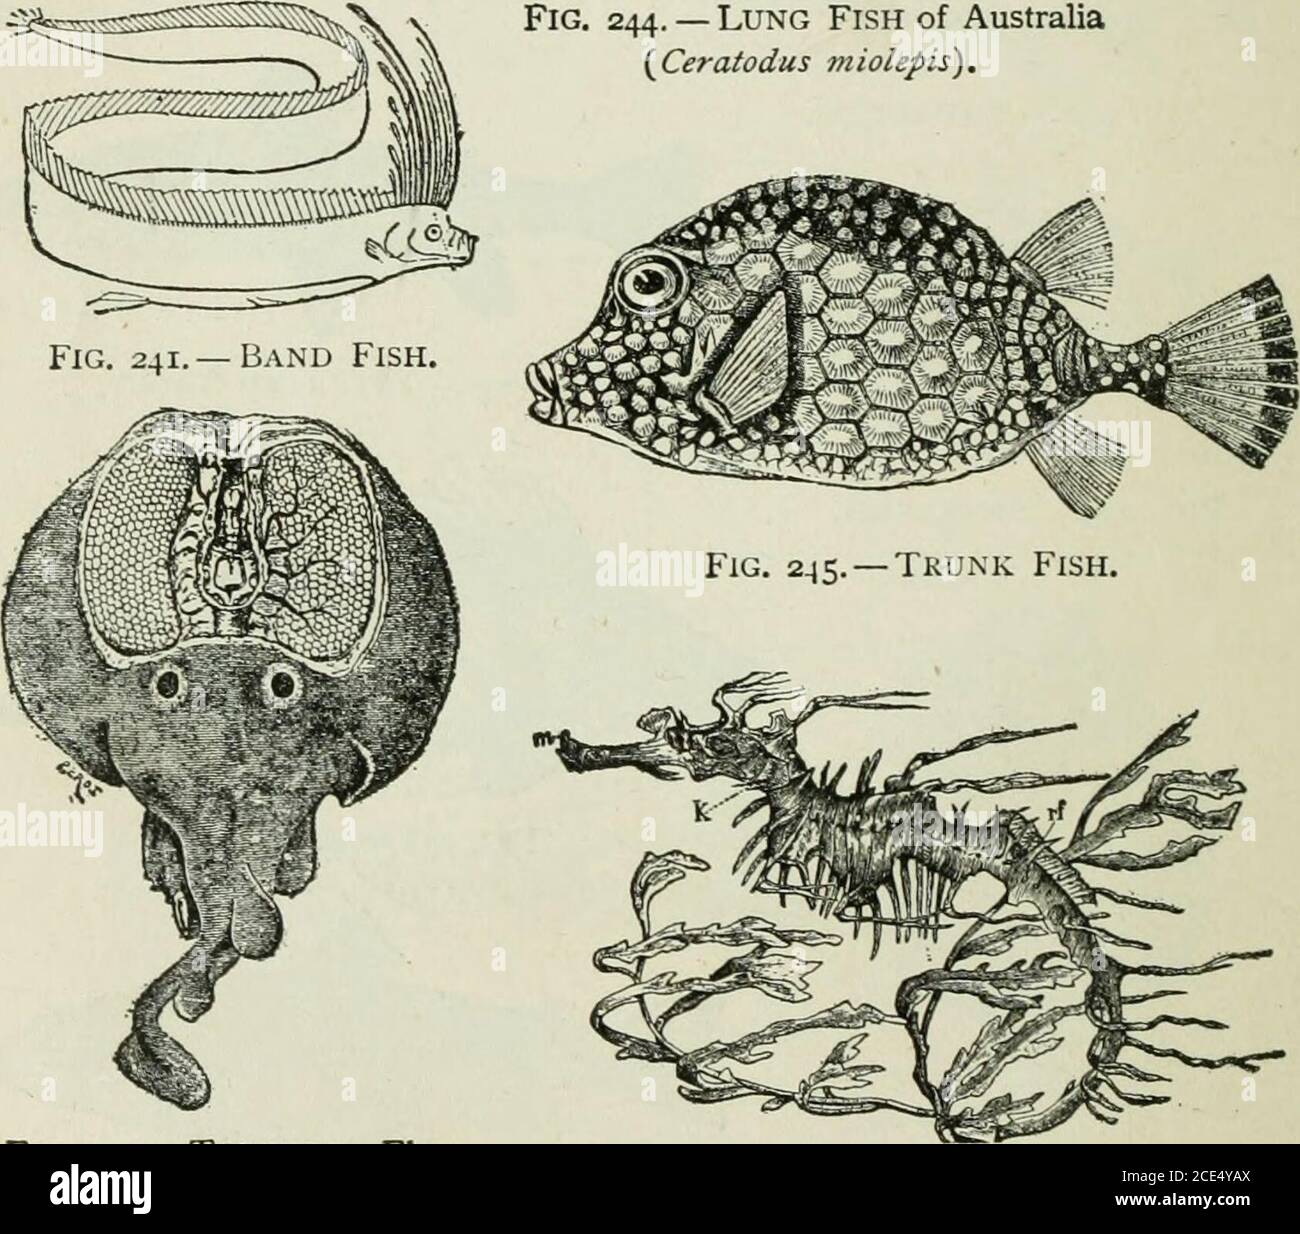 Beginners' Zoology . Fig. 244. — Lung Fish of Australia( Ceratodus m  iolepis),. Fig. 242. — TCRPEDO. Elec-trical organs at right andleft of  brain. Fig. 246. — Seaweed Fish, x^{^Pkyllopteryx eqties).